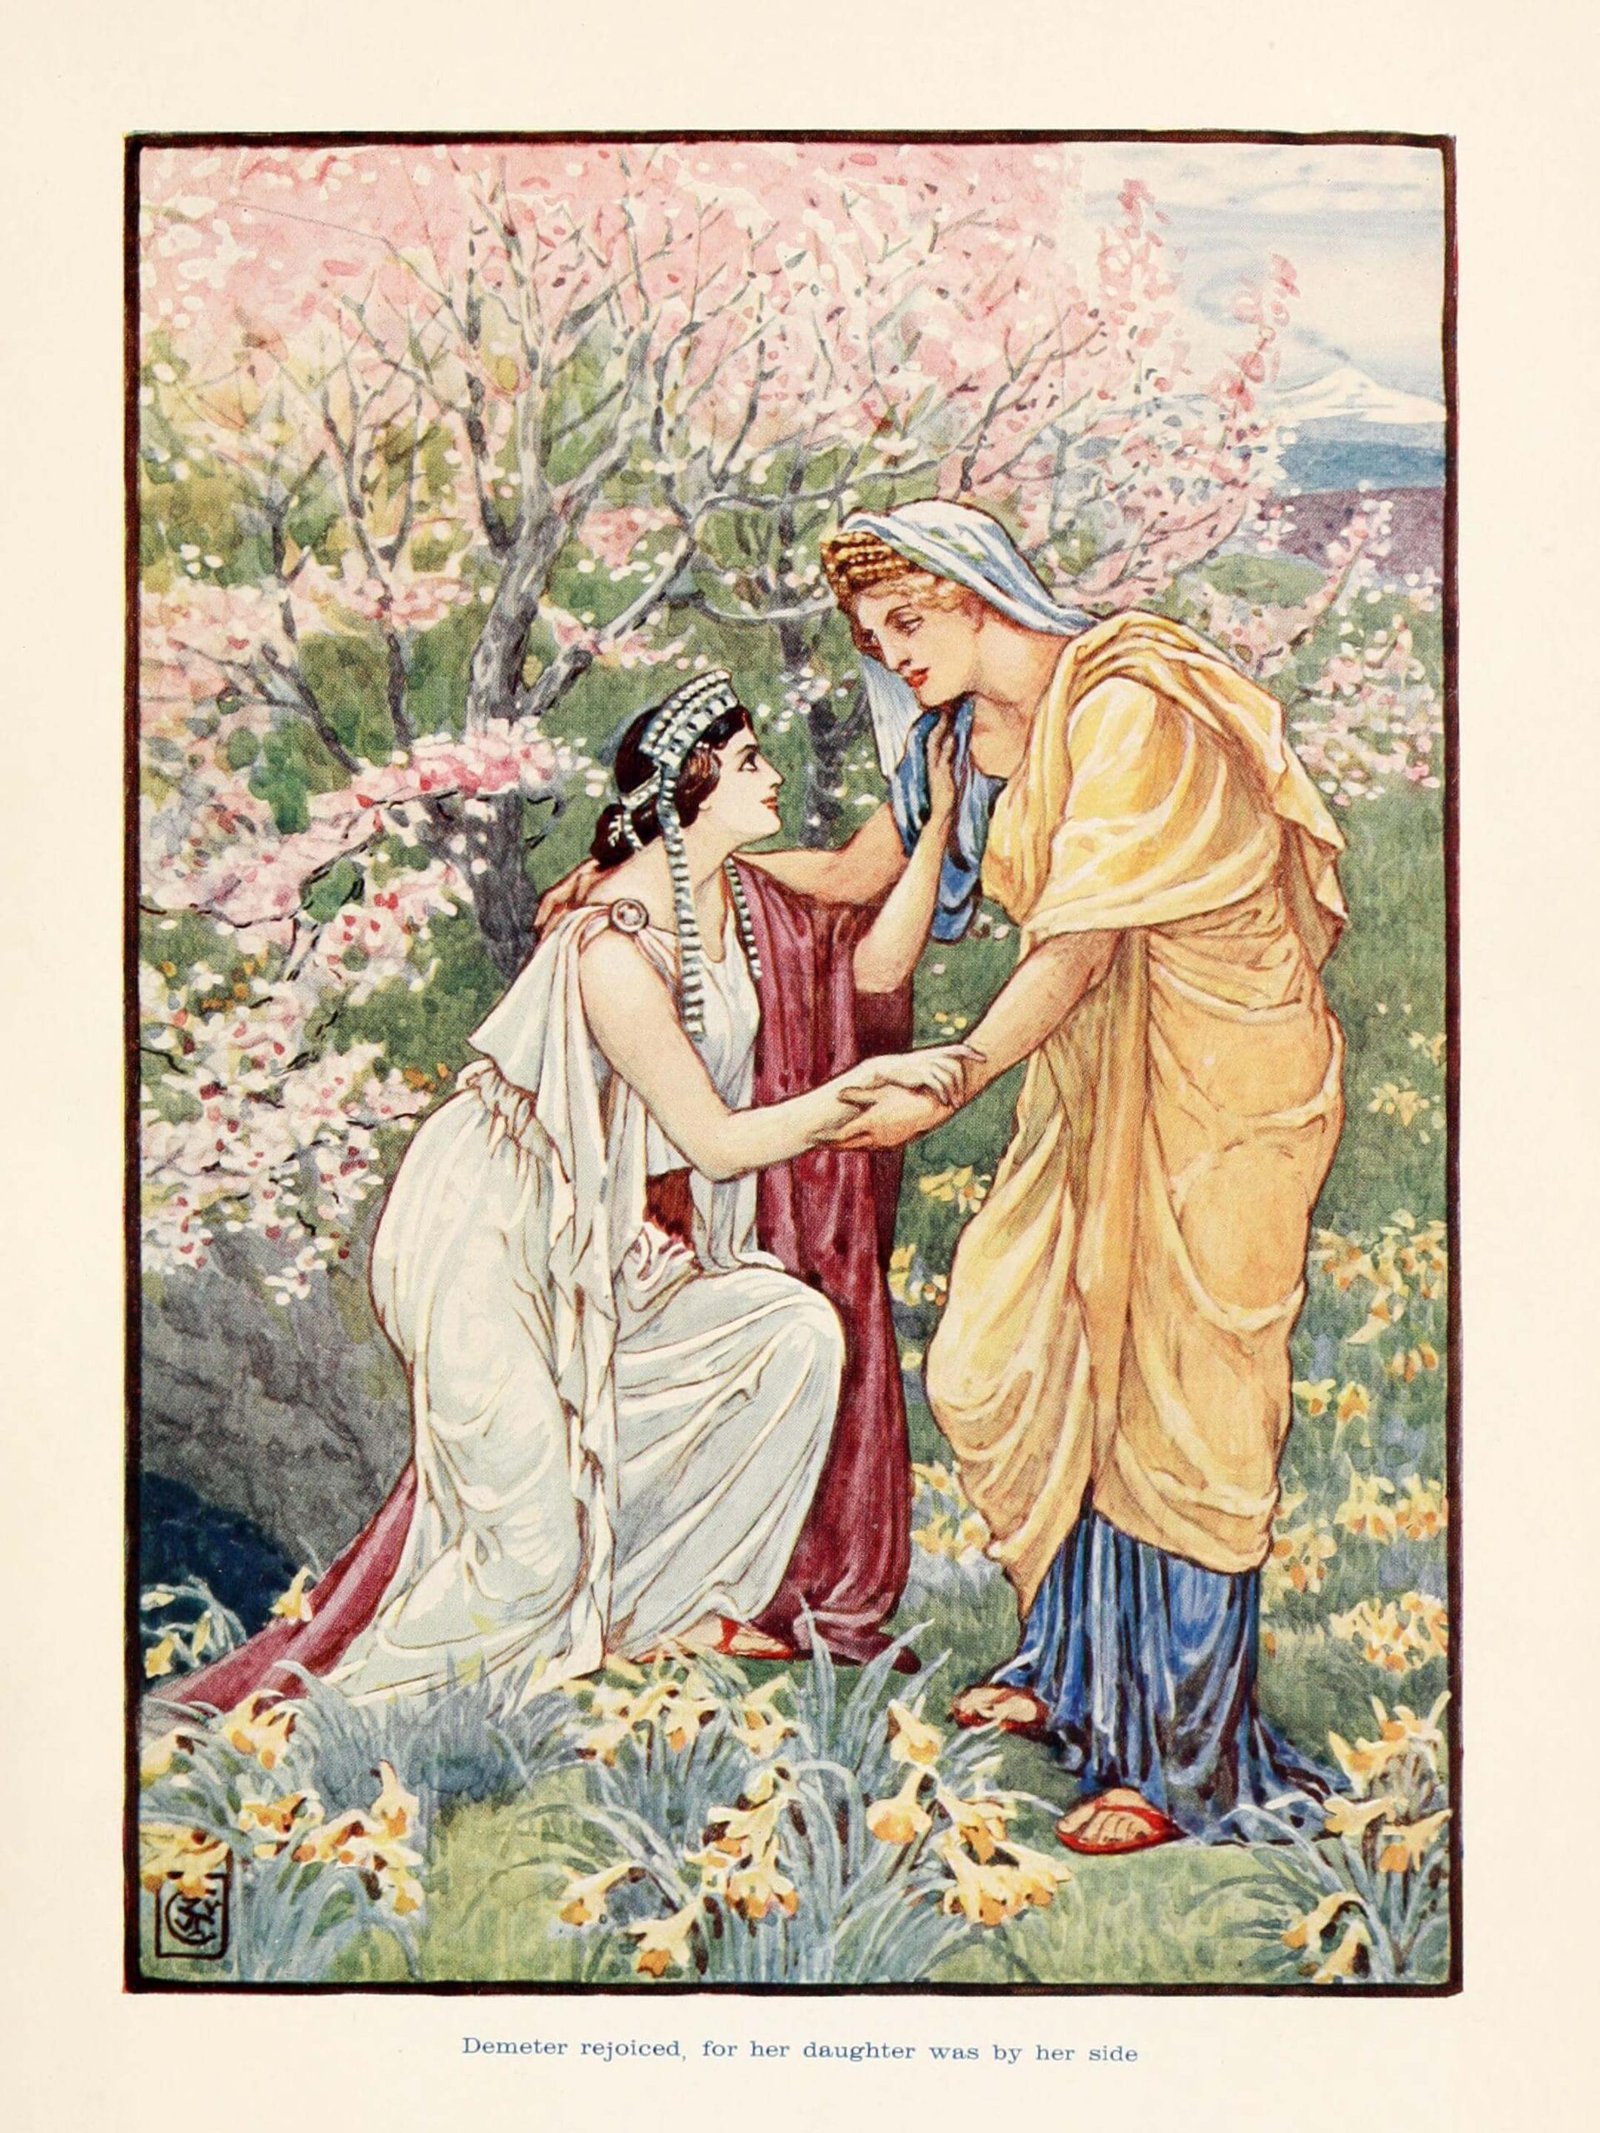 This painting represents Demeter meeting her daughter Persephone, returning from the underworld. She meets her nearby a tree in full blossom and there are a lot of colorful flowers around.